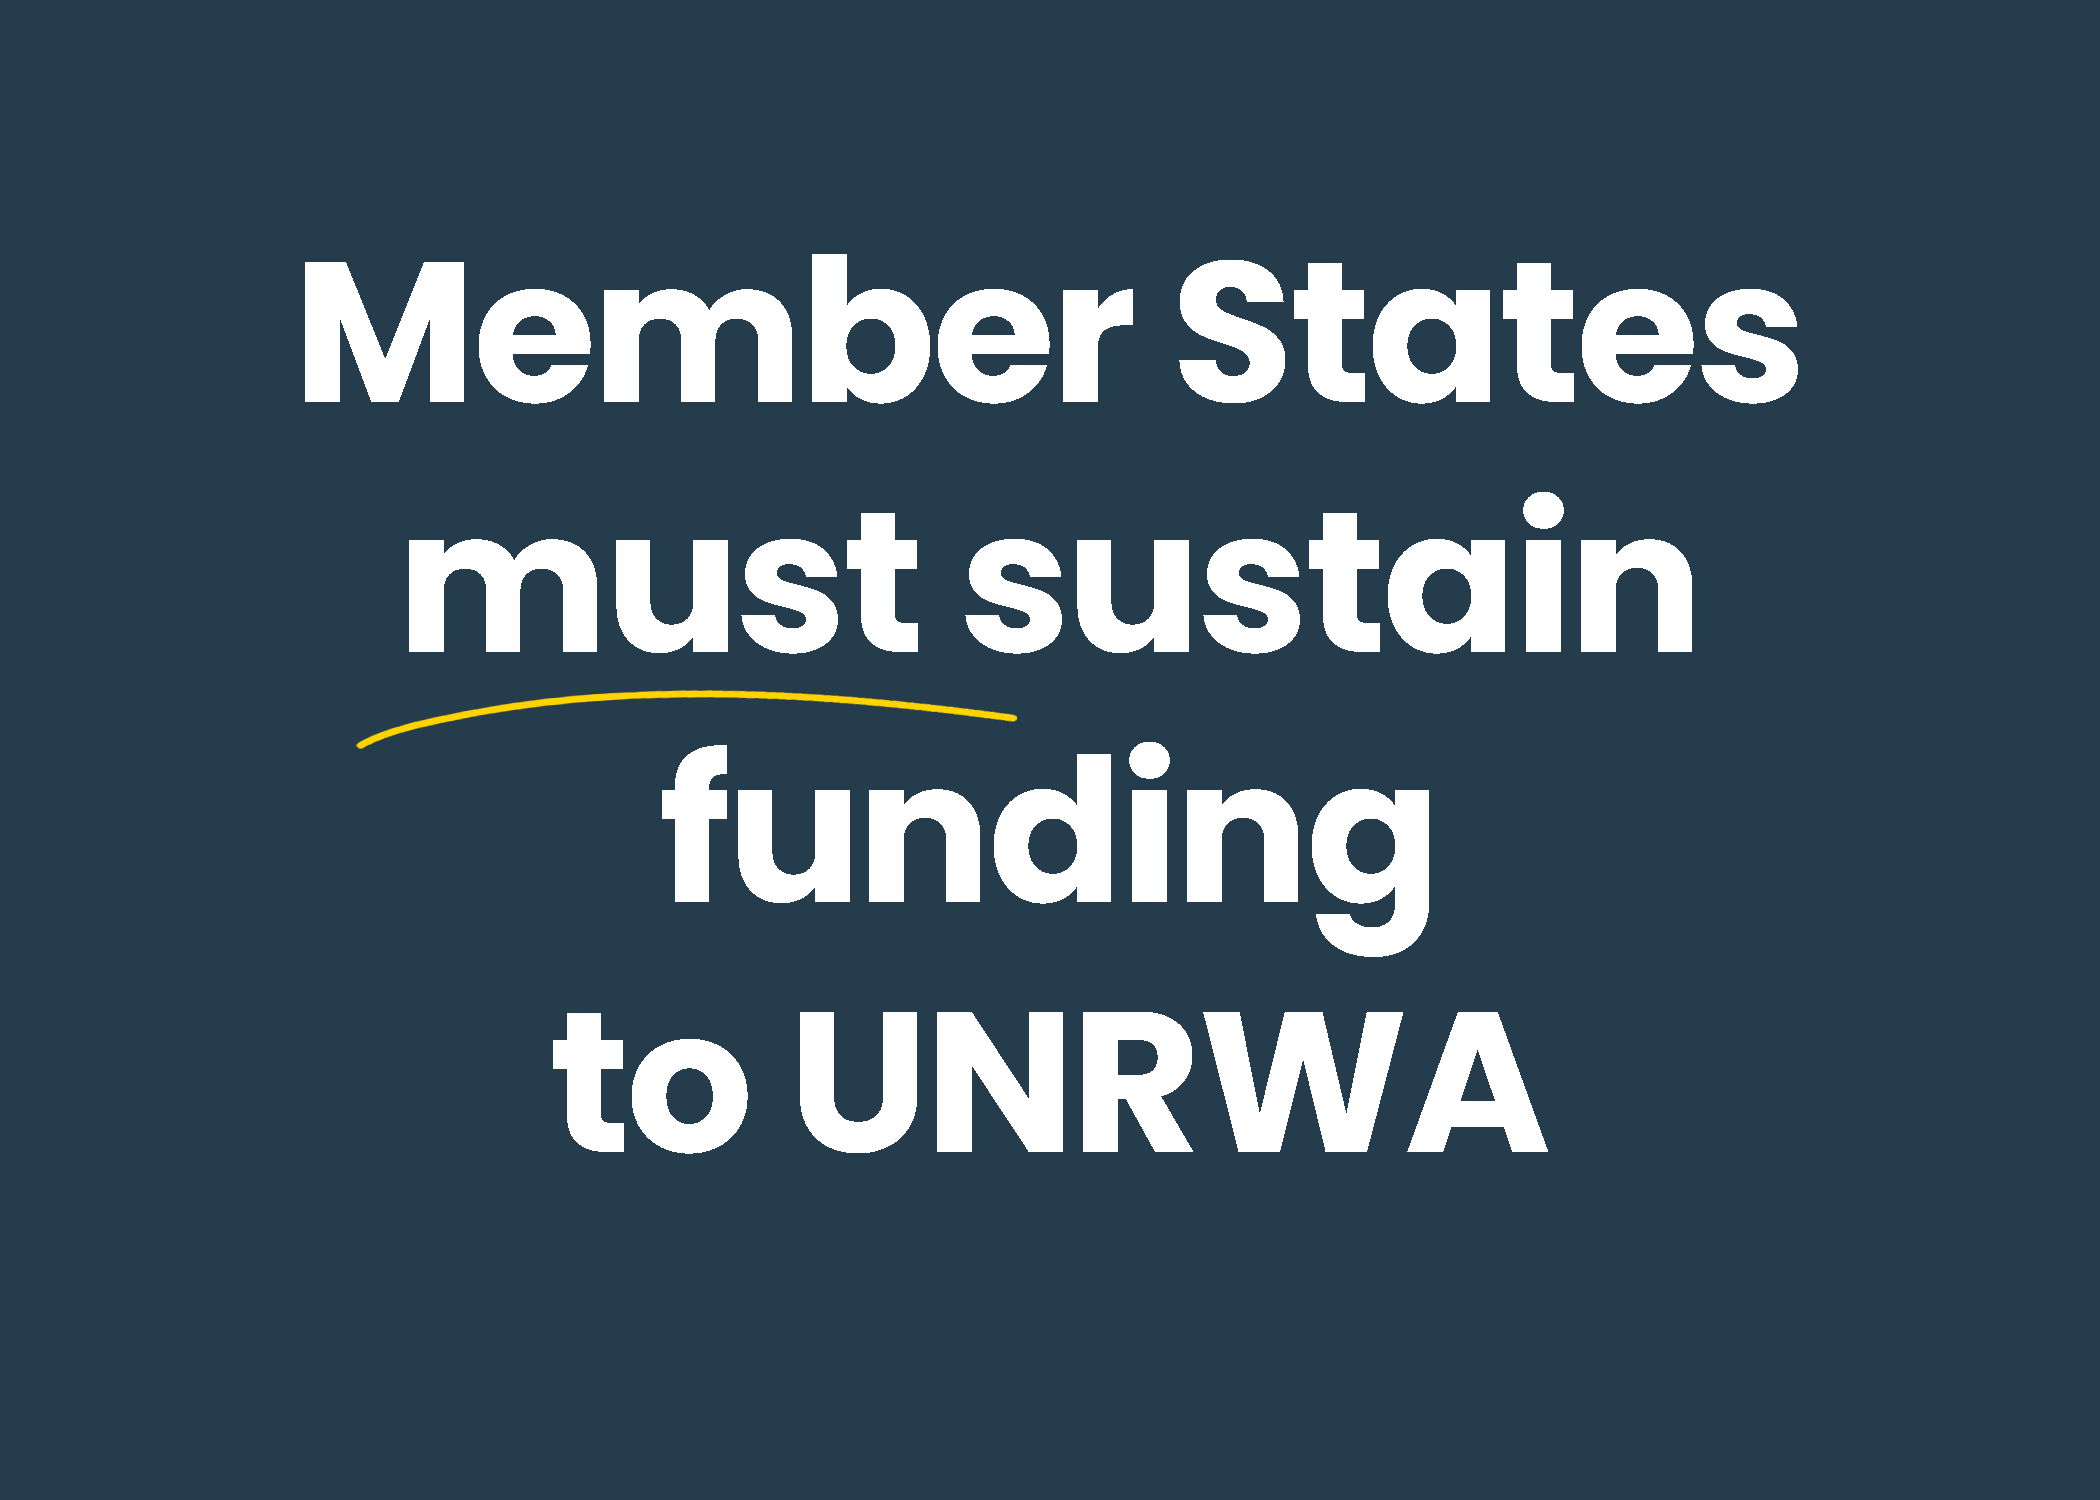 A dark blue background with the following words: "Member States must sustain funding to UNRWA"